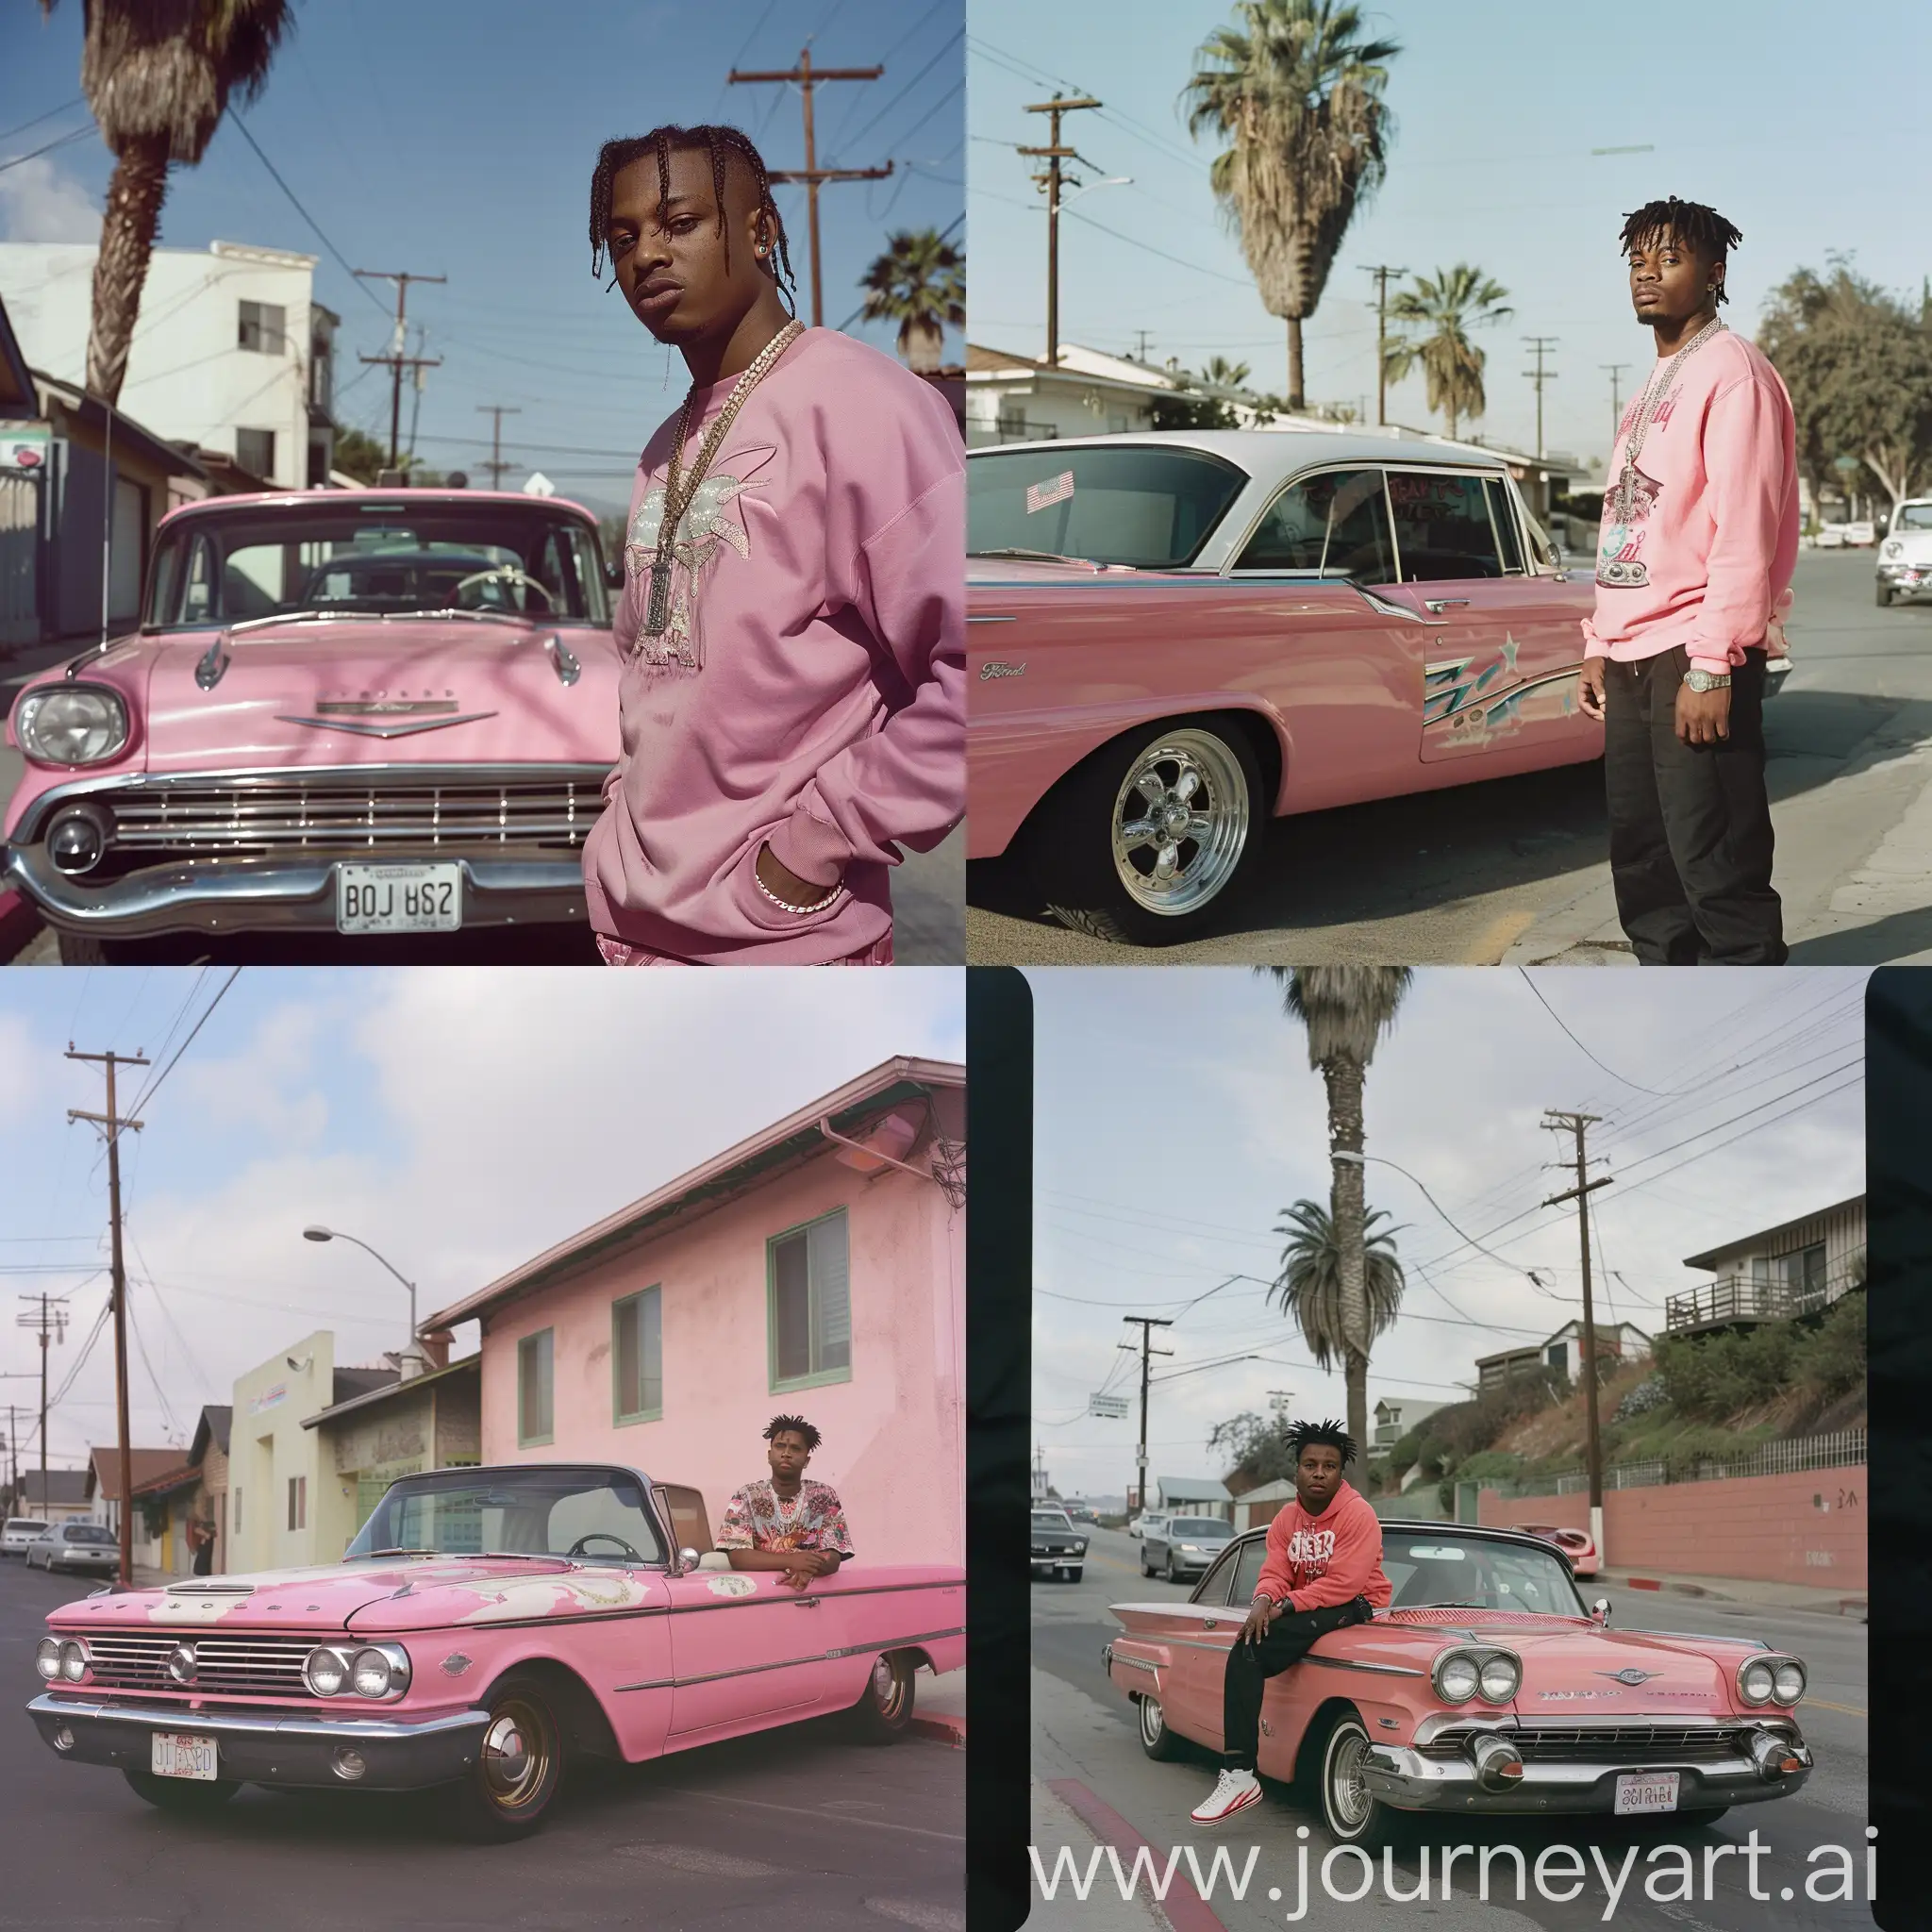 Juice-Wrld-Portrait-with-Vintage-Pink-Ford-in-Los-Angeles-Street